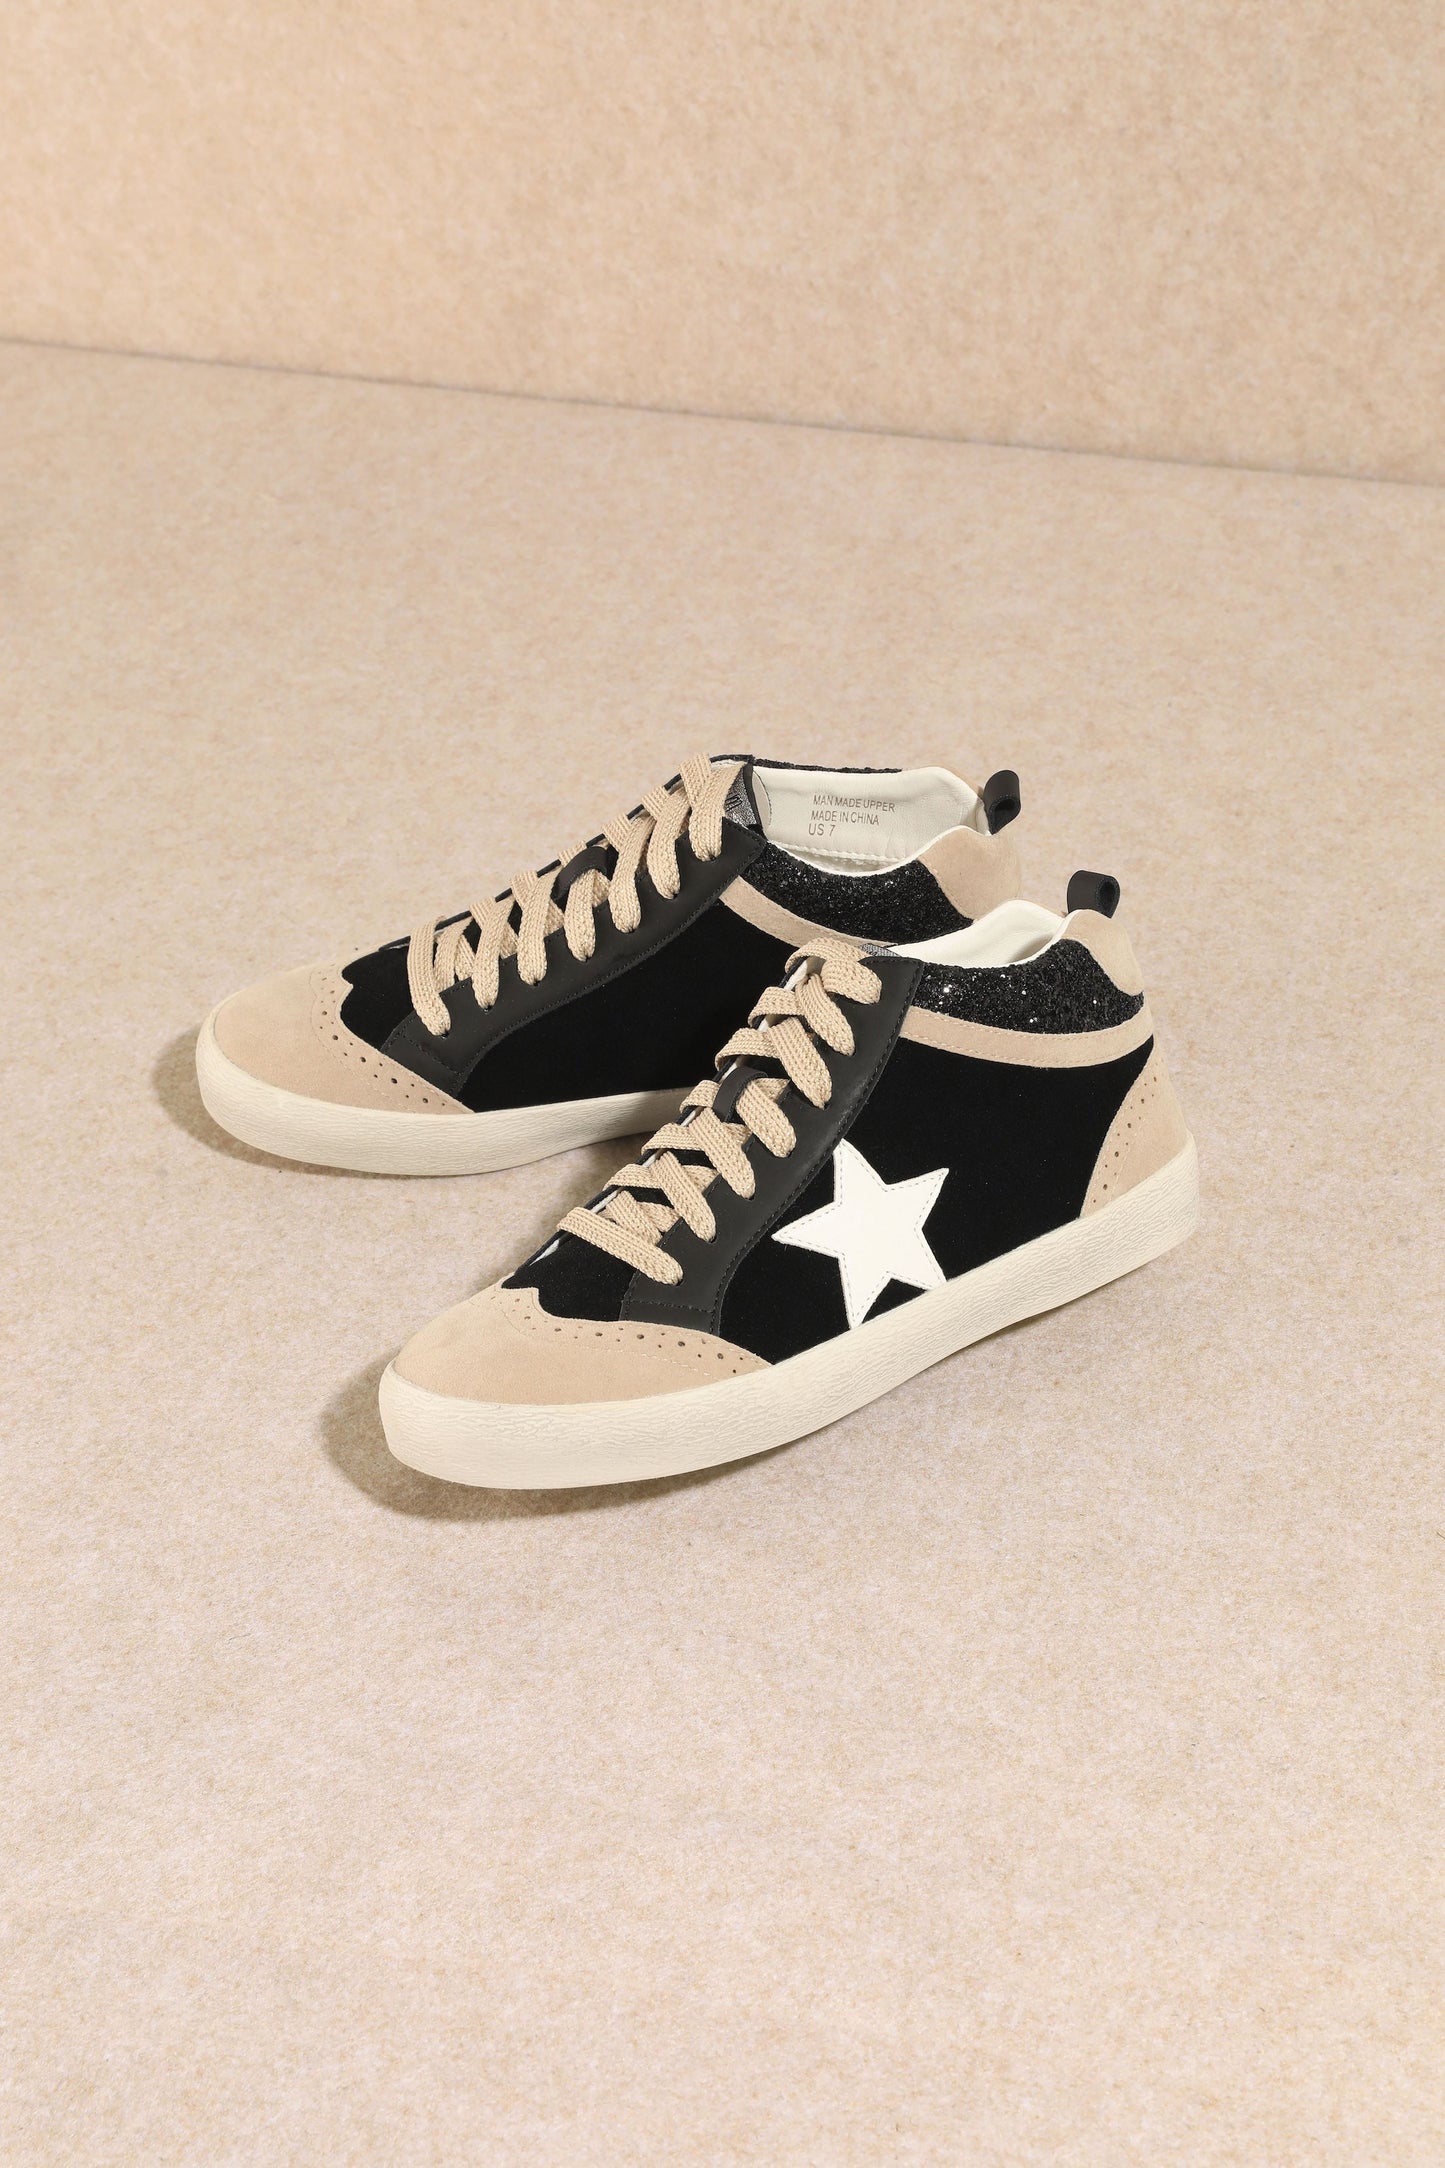 The Daisy Mae Sneakers